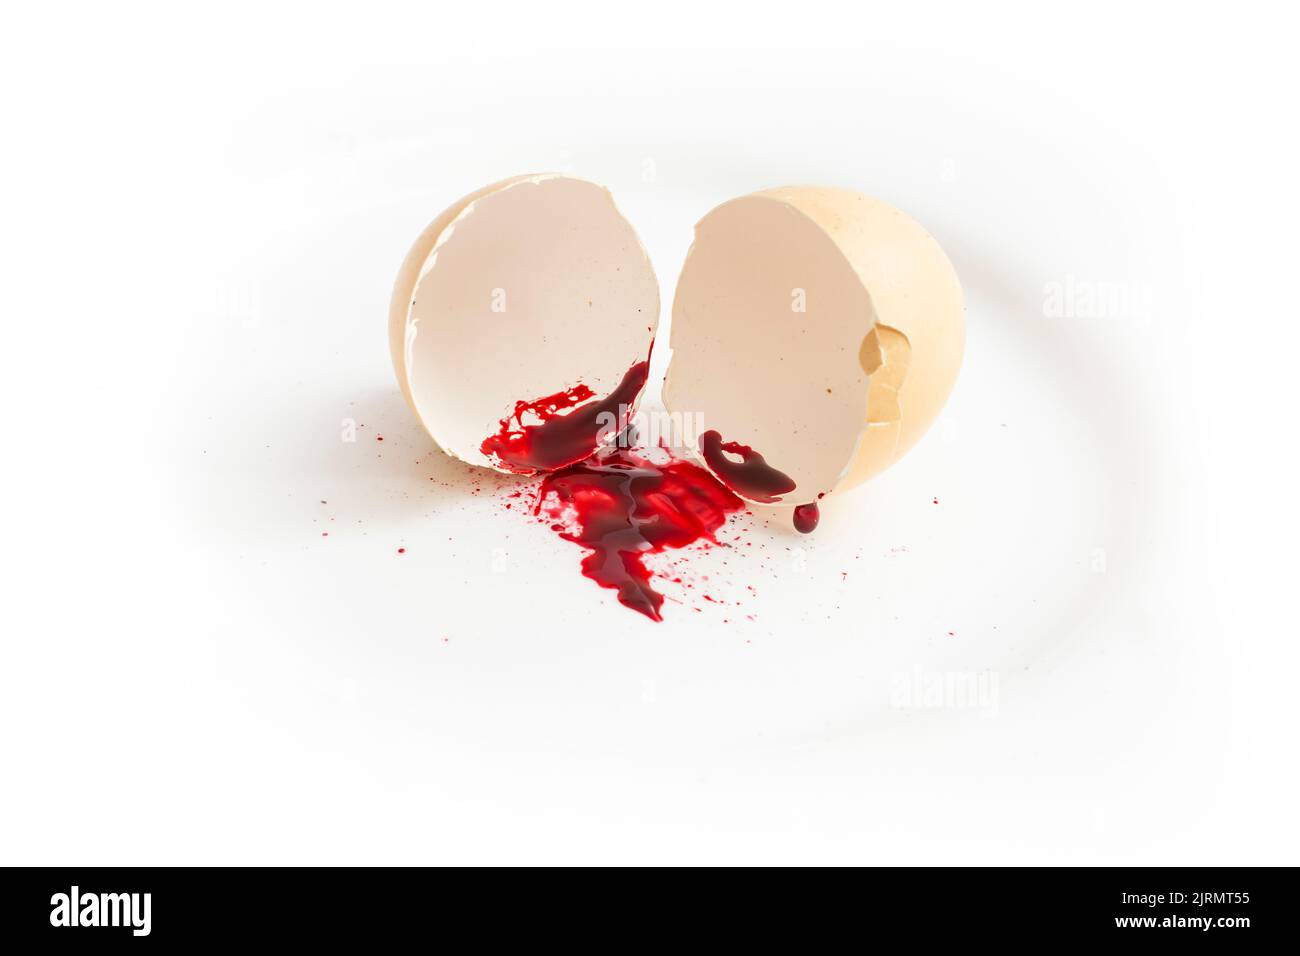 Cracked egg shell with a blood trail,  isolated on white. Abortion concept Stock Photo